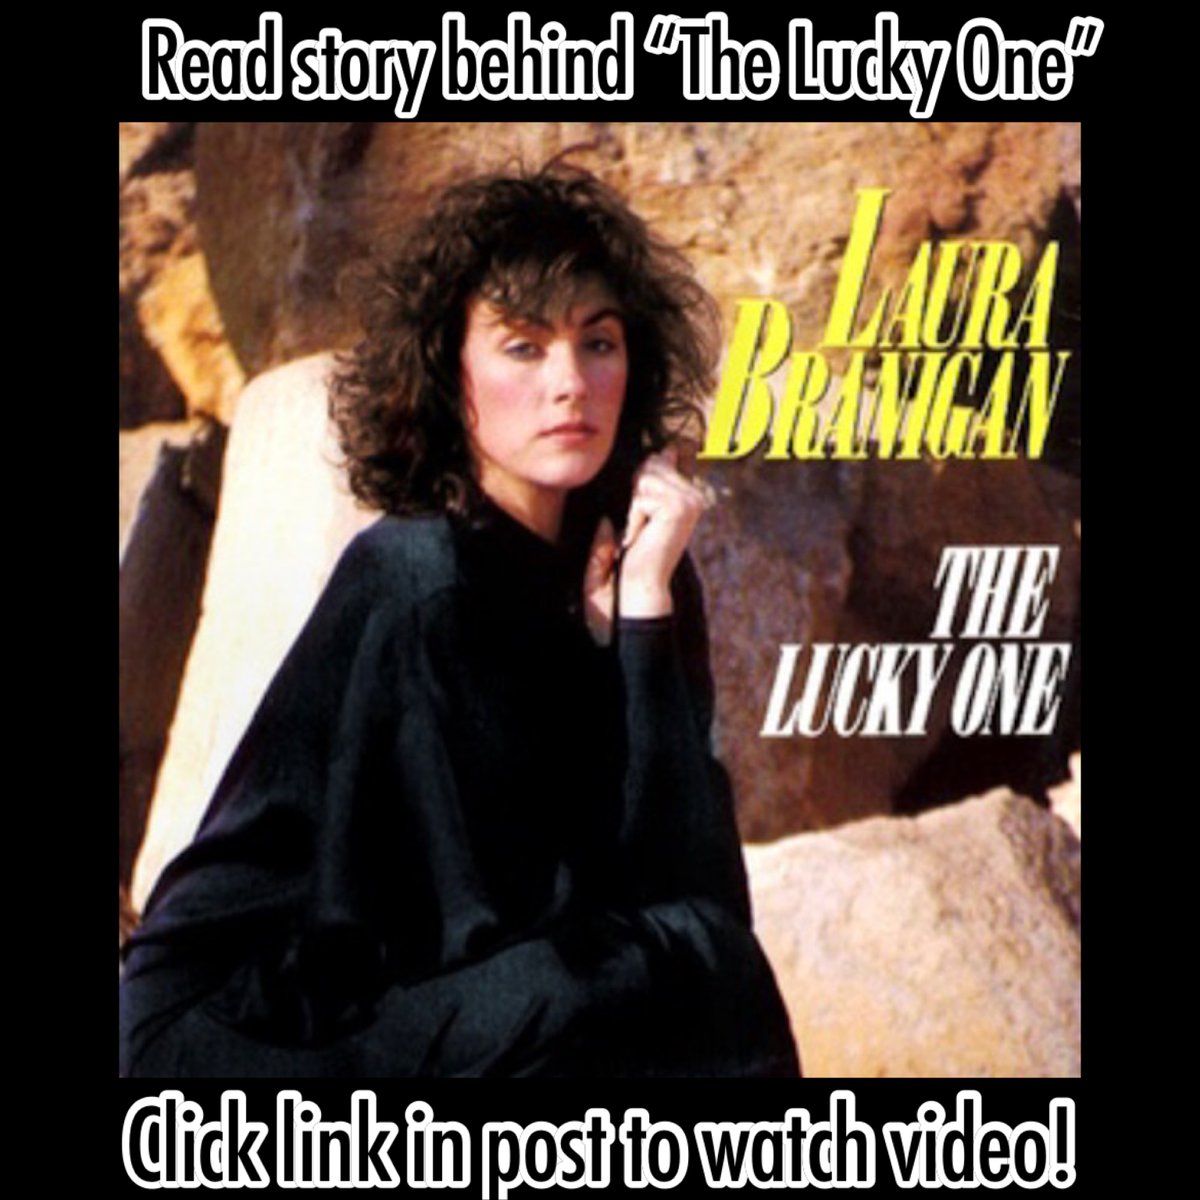 #BehindTheMusic Here's the story behind the writing of #TheLuckyOne, 2nd #single from #LauraBranigan's biggest-selling #SelfControl album. Broadcast in Nov. 1983, #TVfilm #AnUncommonLove featured a #HaroldFaltermeyer arrangement of 'The Lucky One,' a #song that #BruceRoberts…